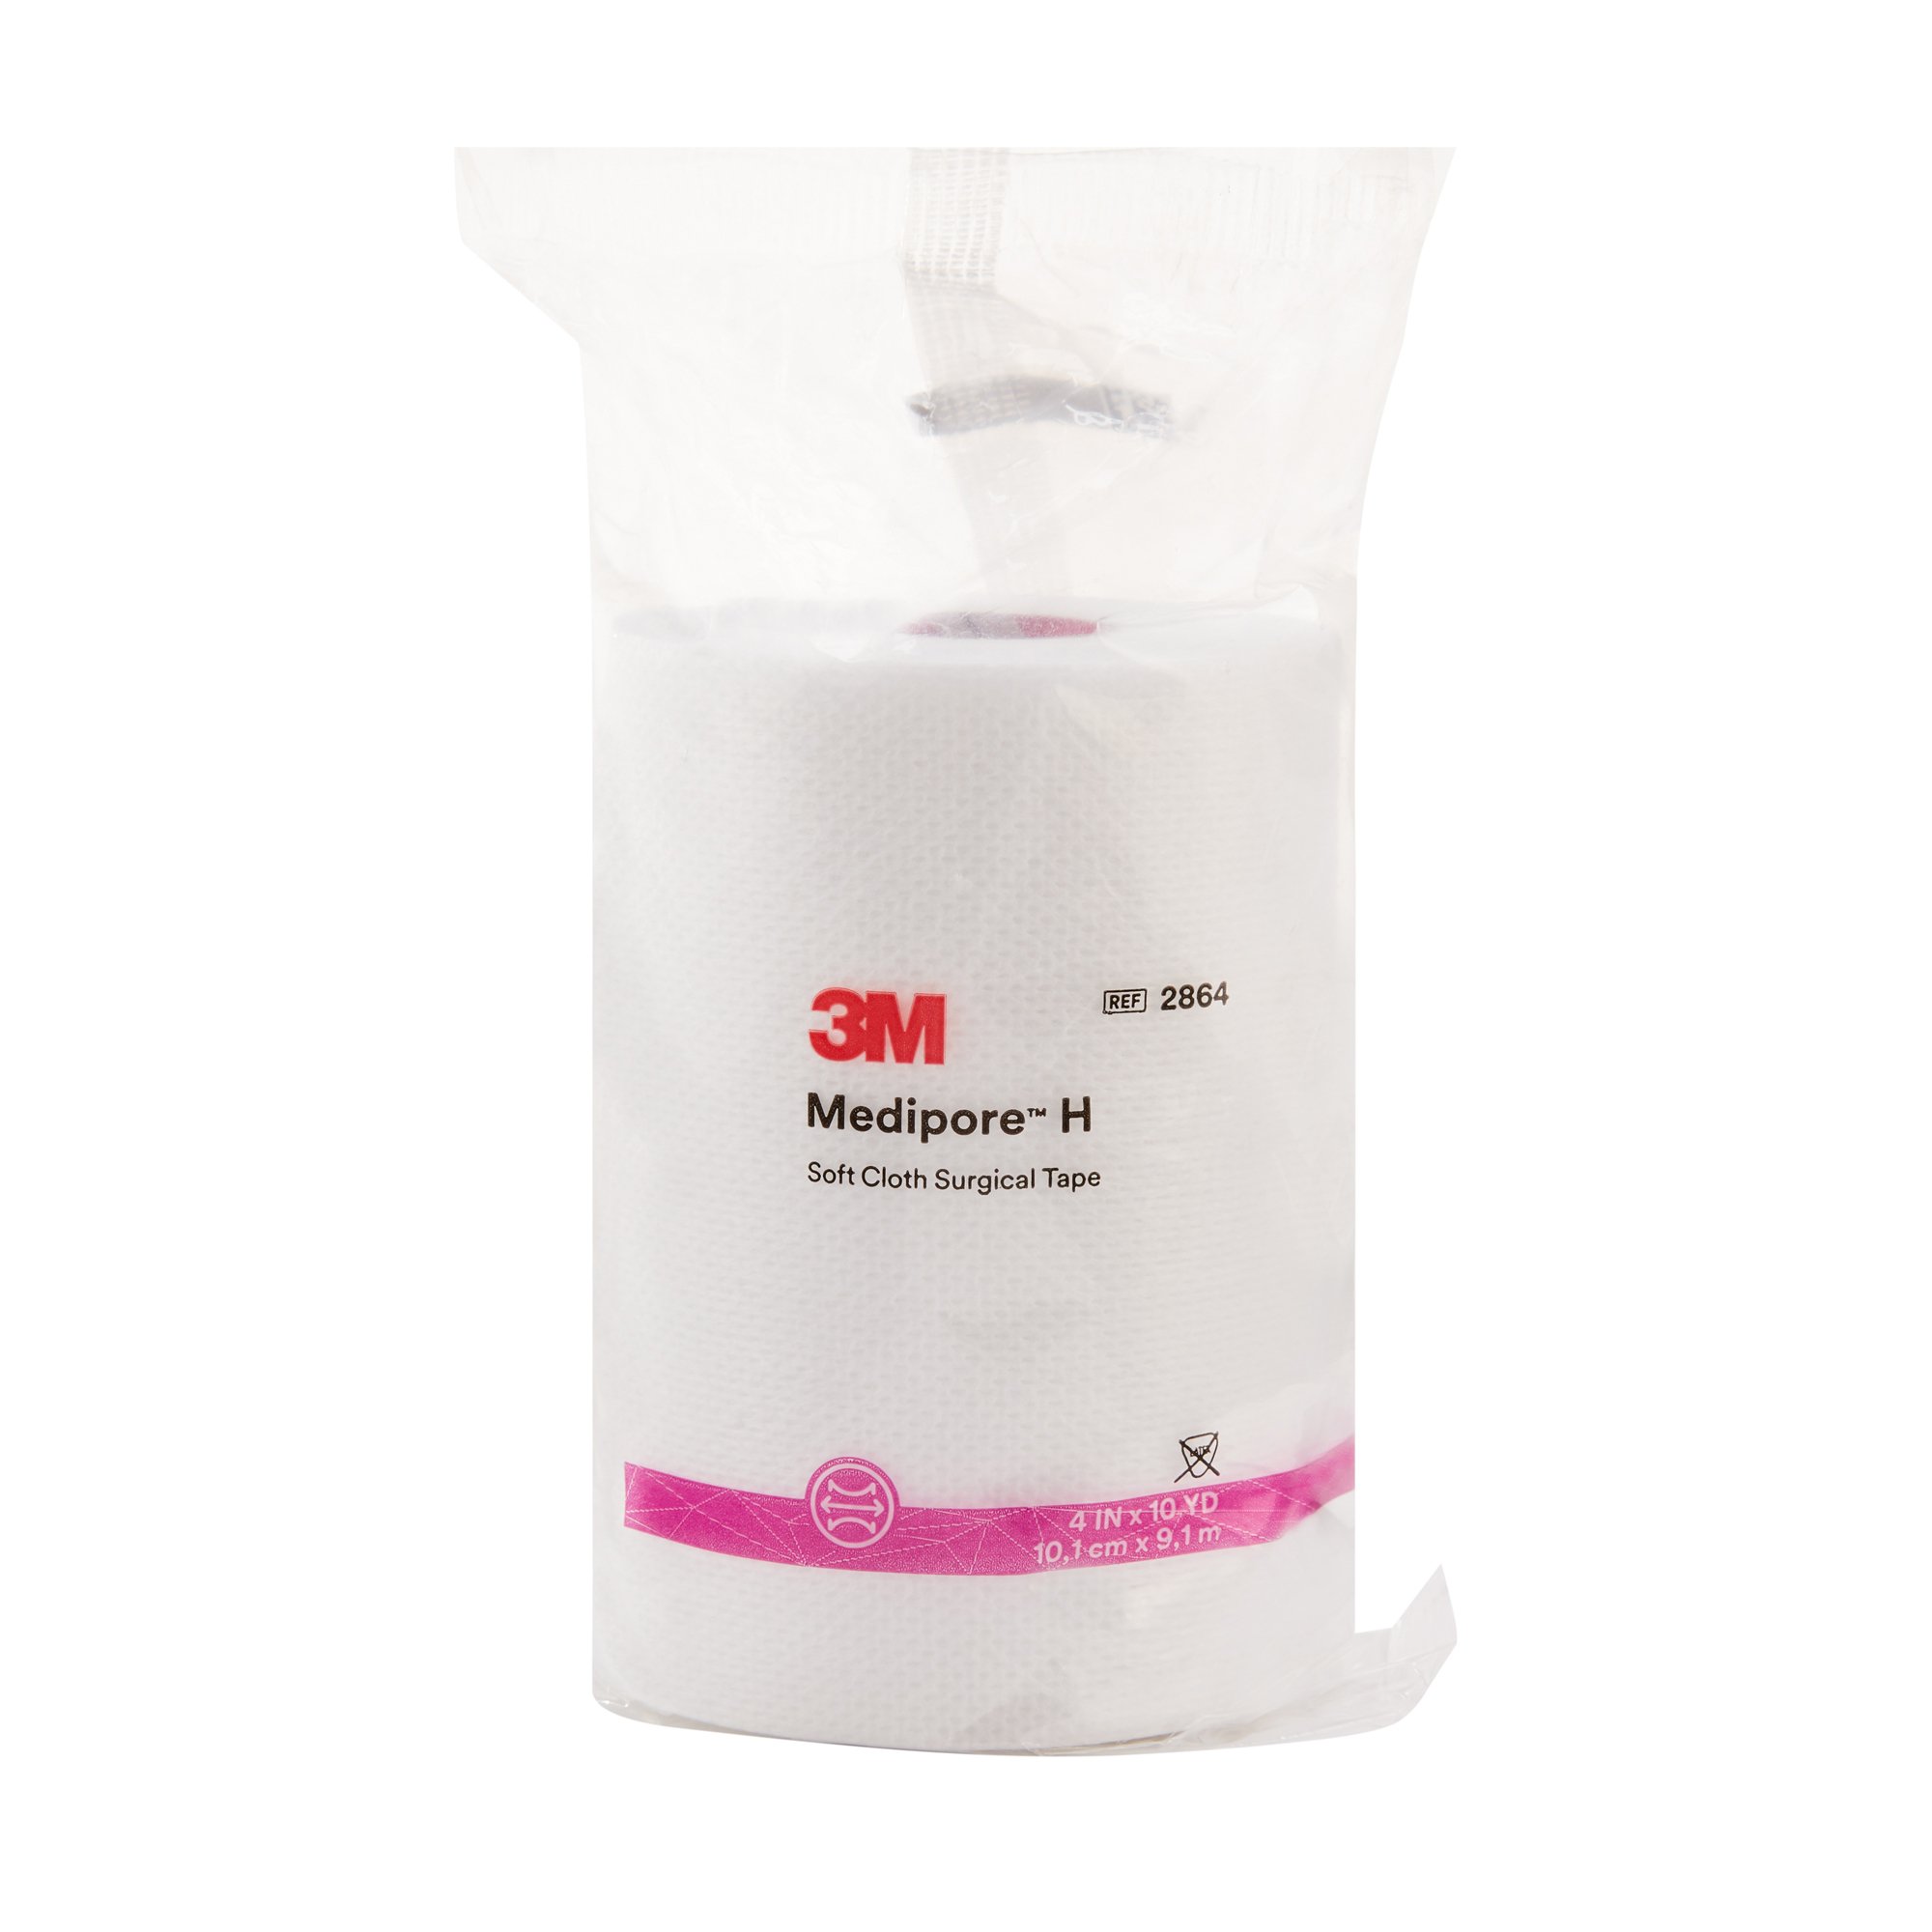 3M™ Medipore™ H Perforated Soft Cloth Medical Tape